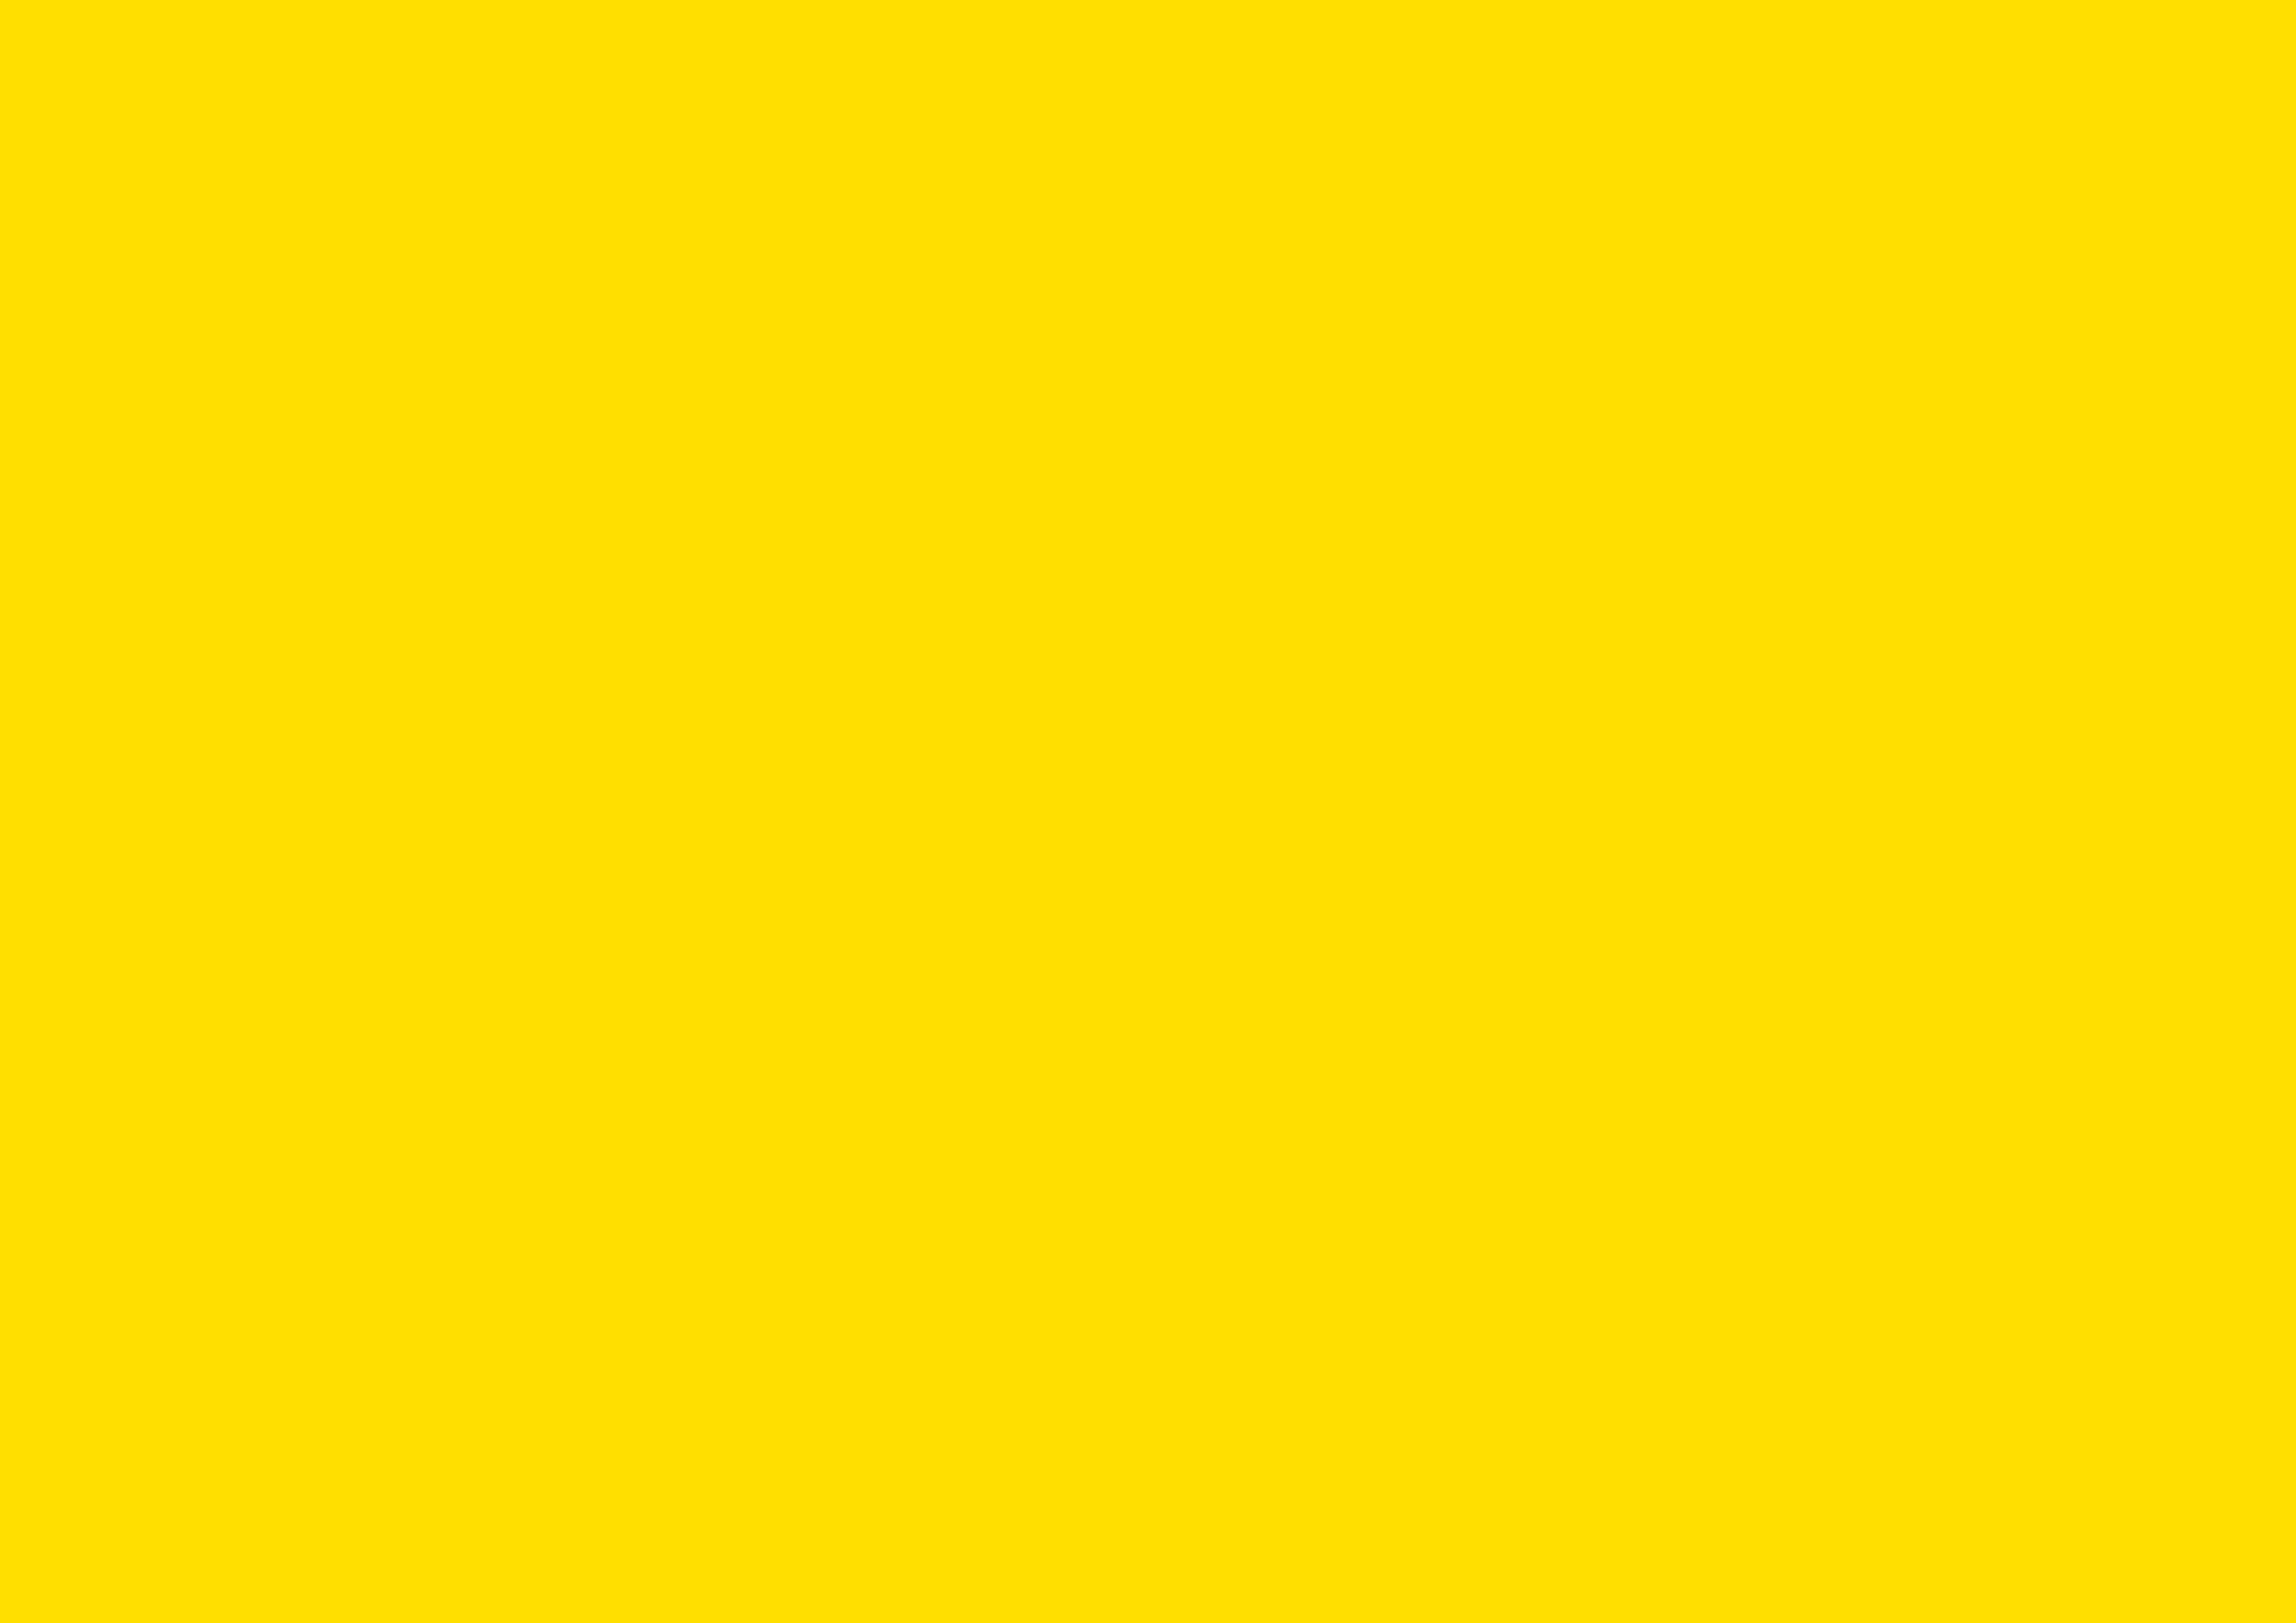 3508x2480 Yellow Pantone Solid Color Background